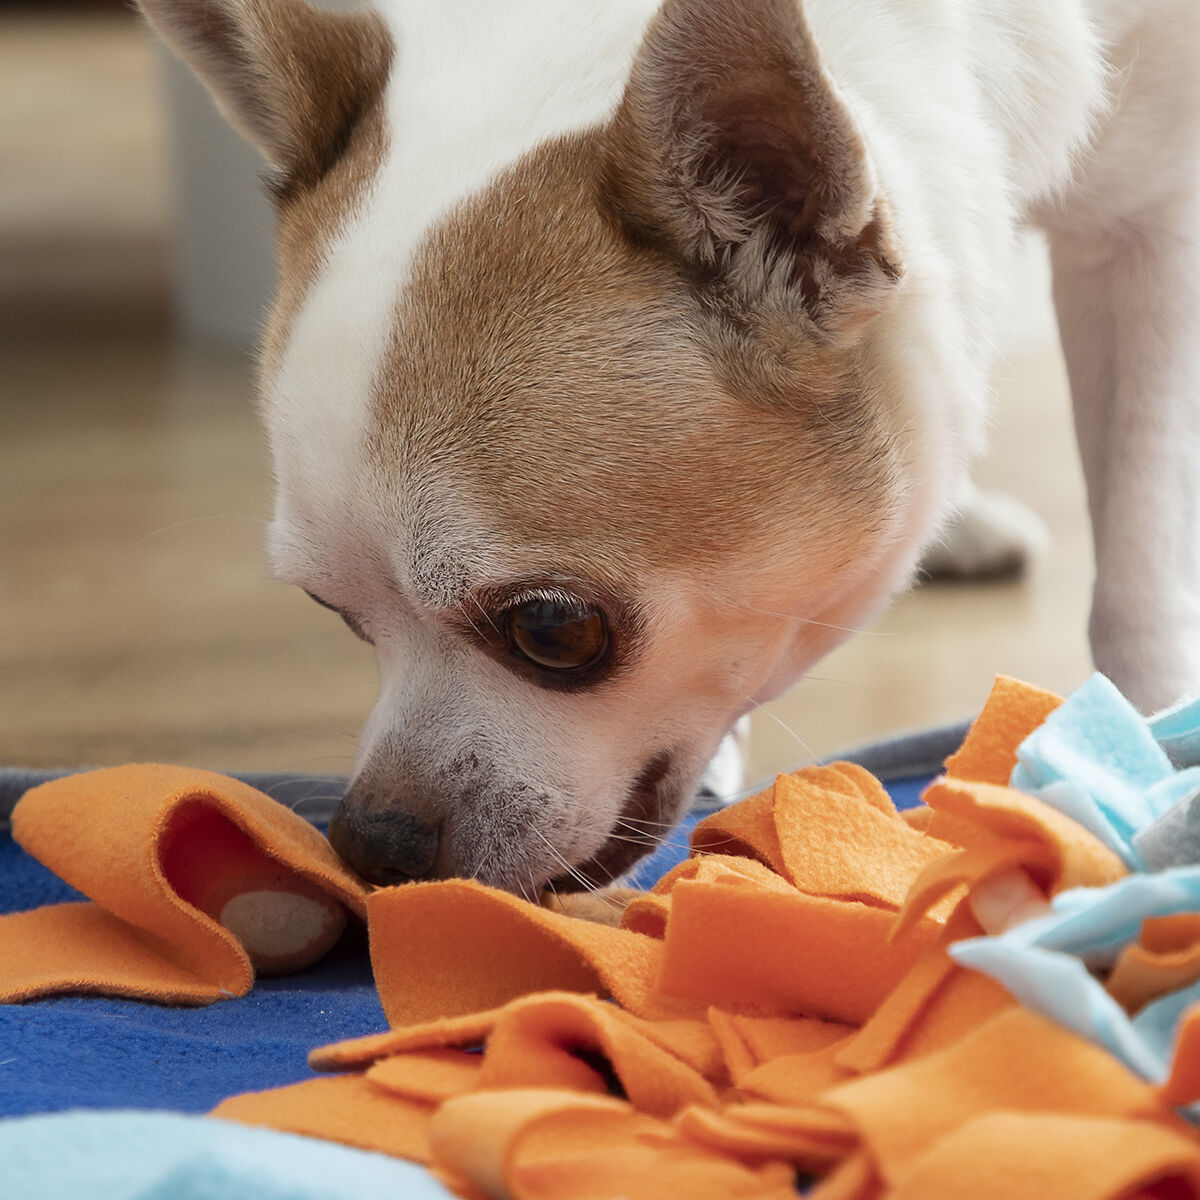 Sniffing Mat for Pets Fooland InnovaGoods